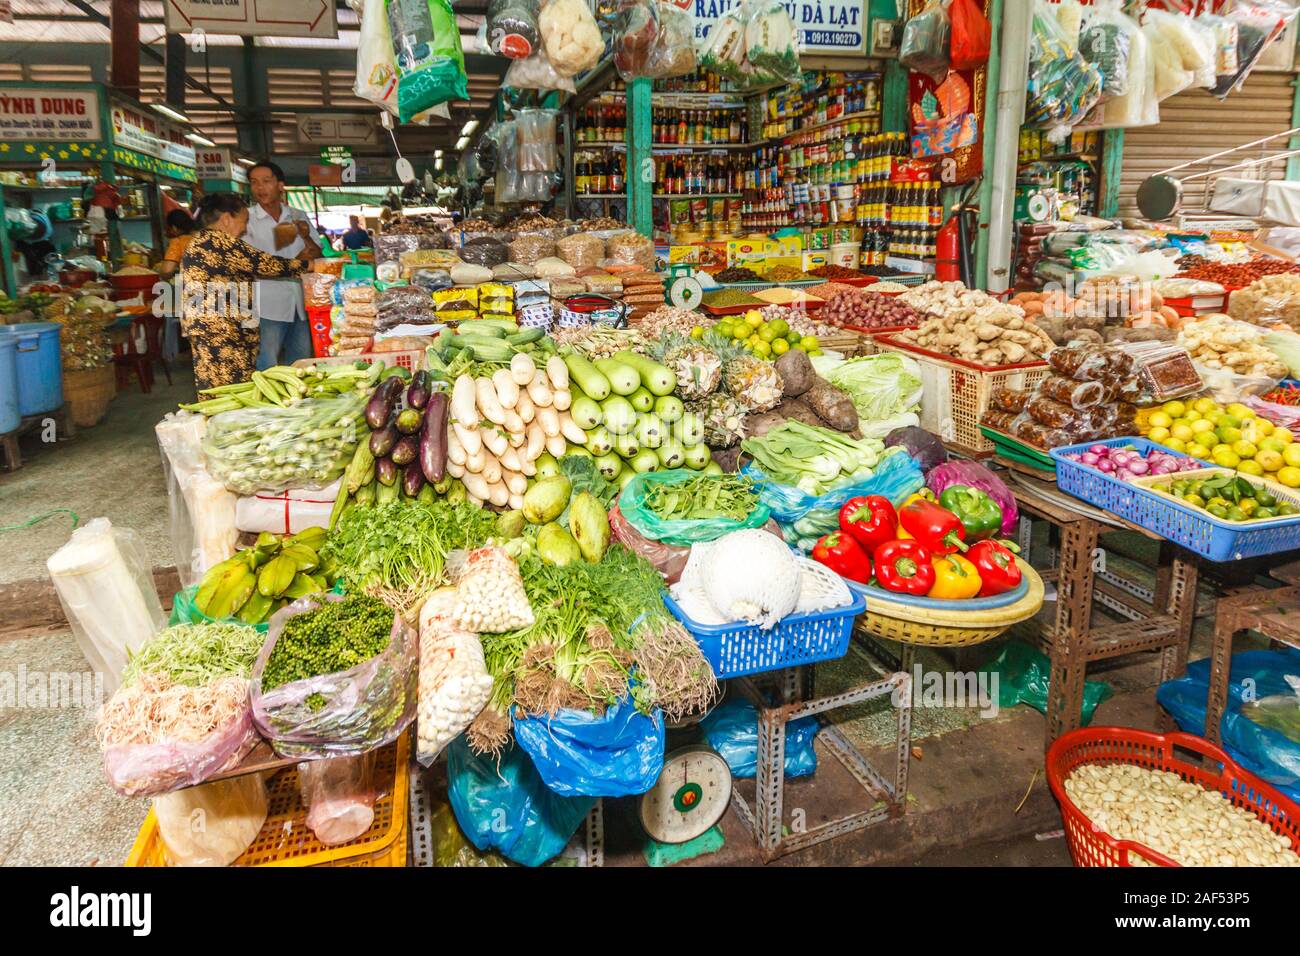 Ho Chi Minh City, Vietnam - October 30th 2013:  Vegetables on a stall on Cholon Market. This is the Chinese area of the city. Stock Photo